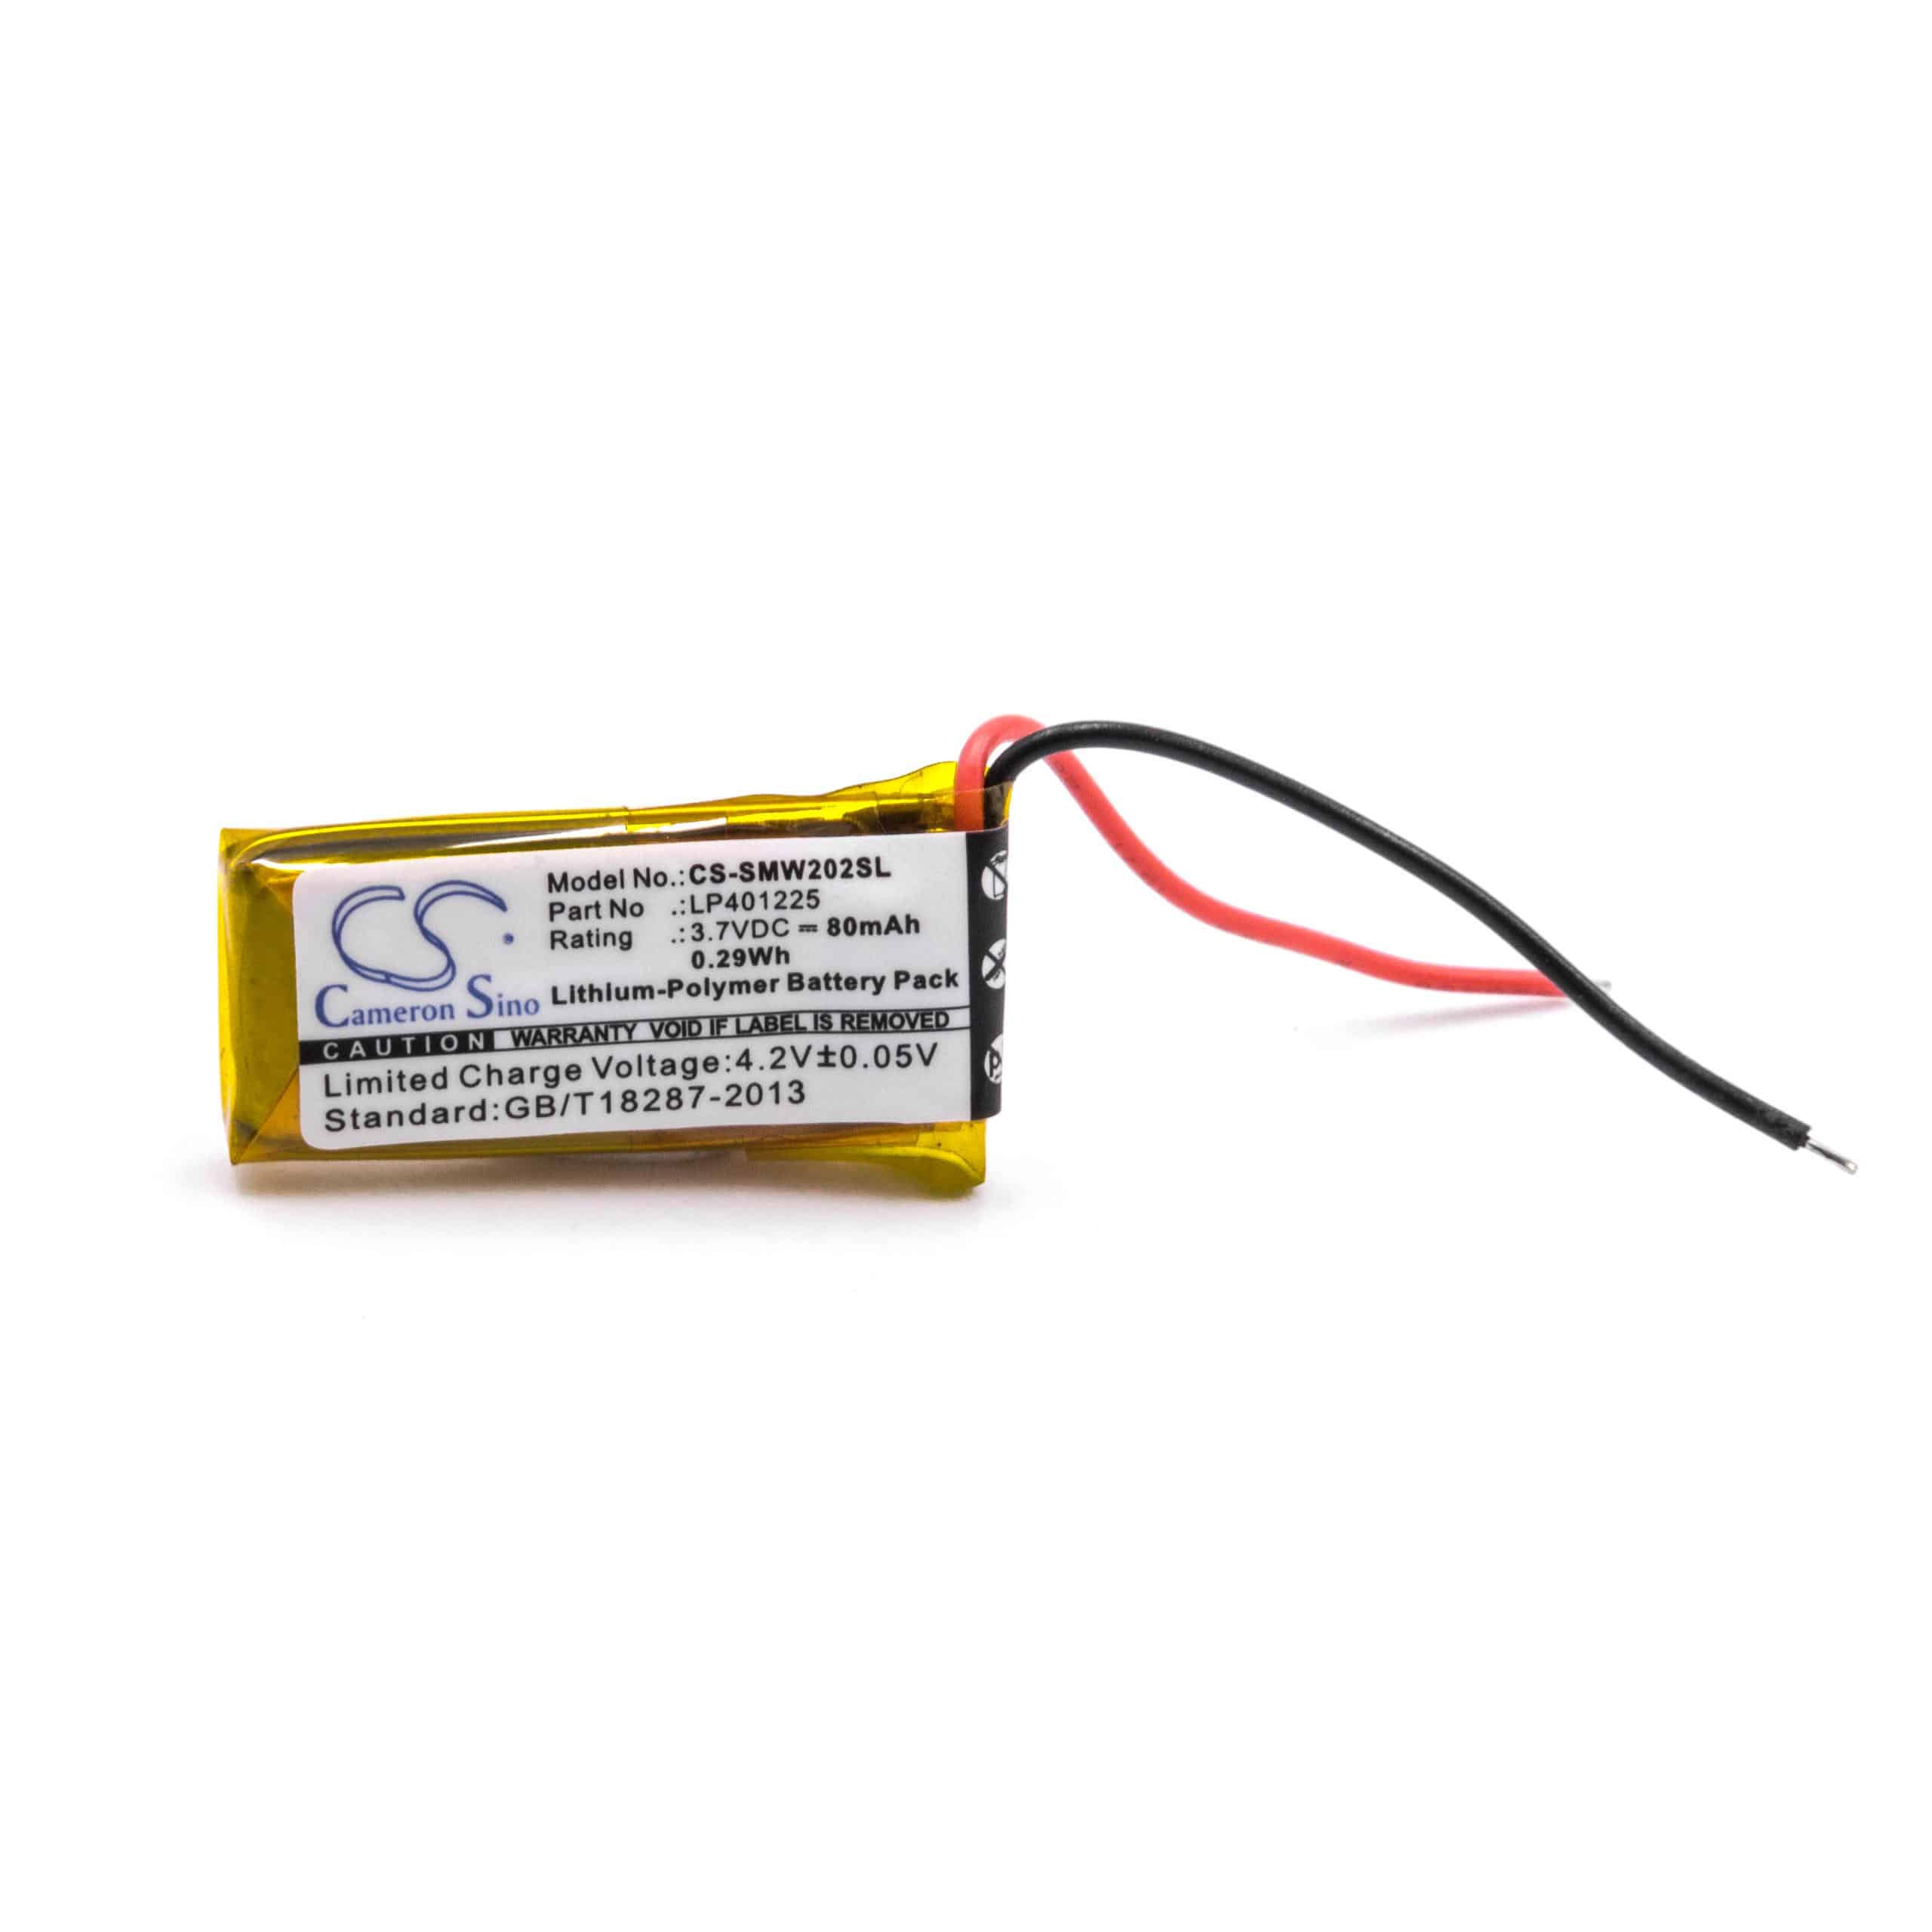 MP3-Player Battery Replacement for Sony LP401225 - 80mAh 3.7V Li-polymer